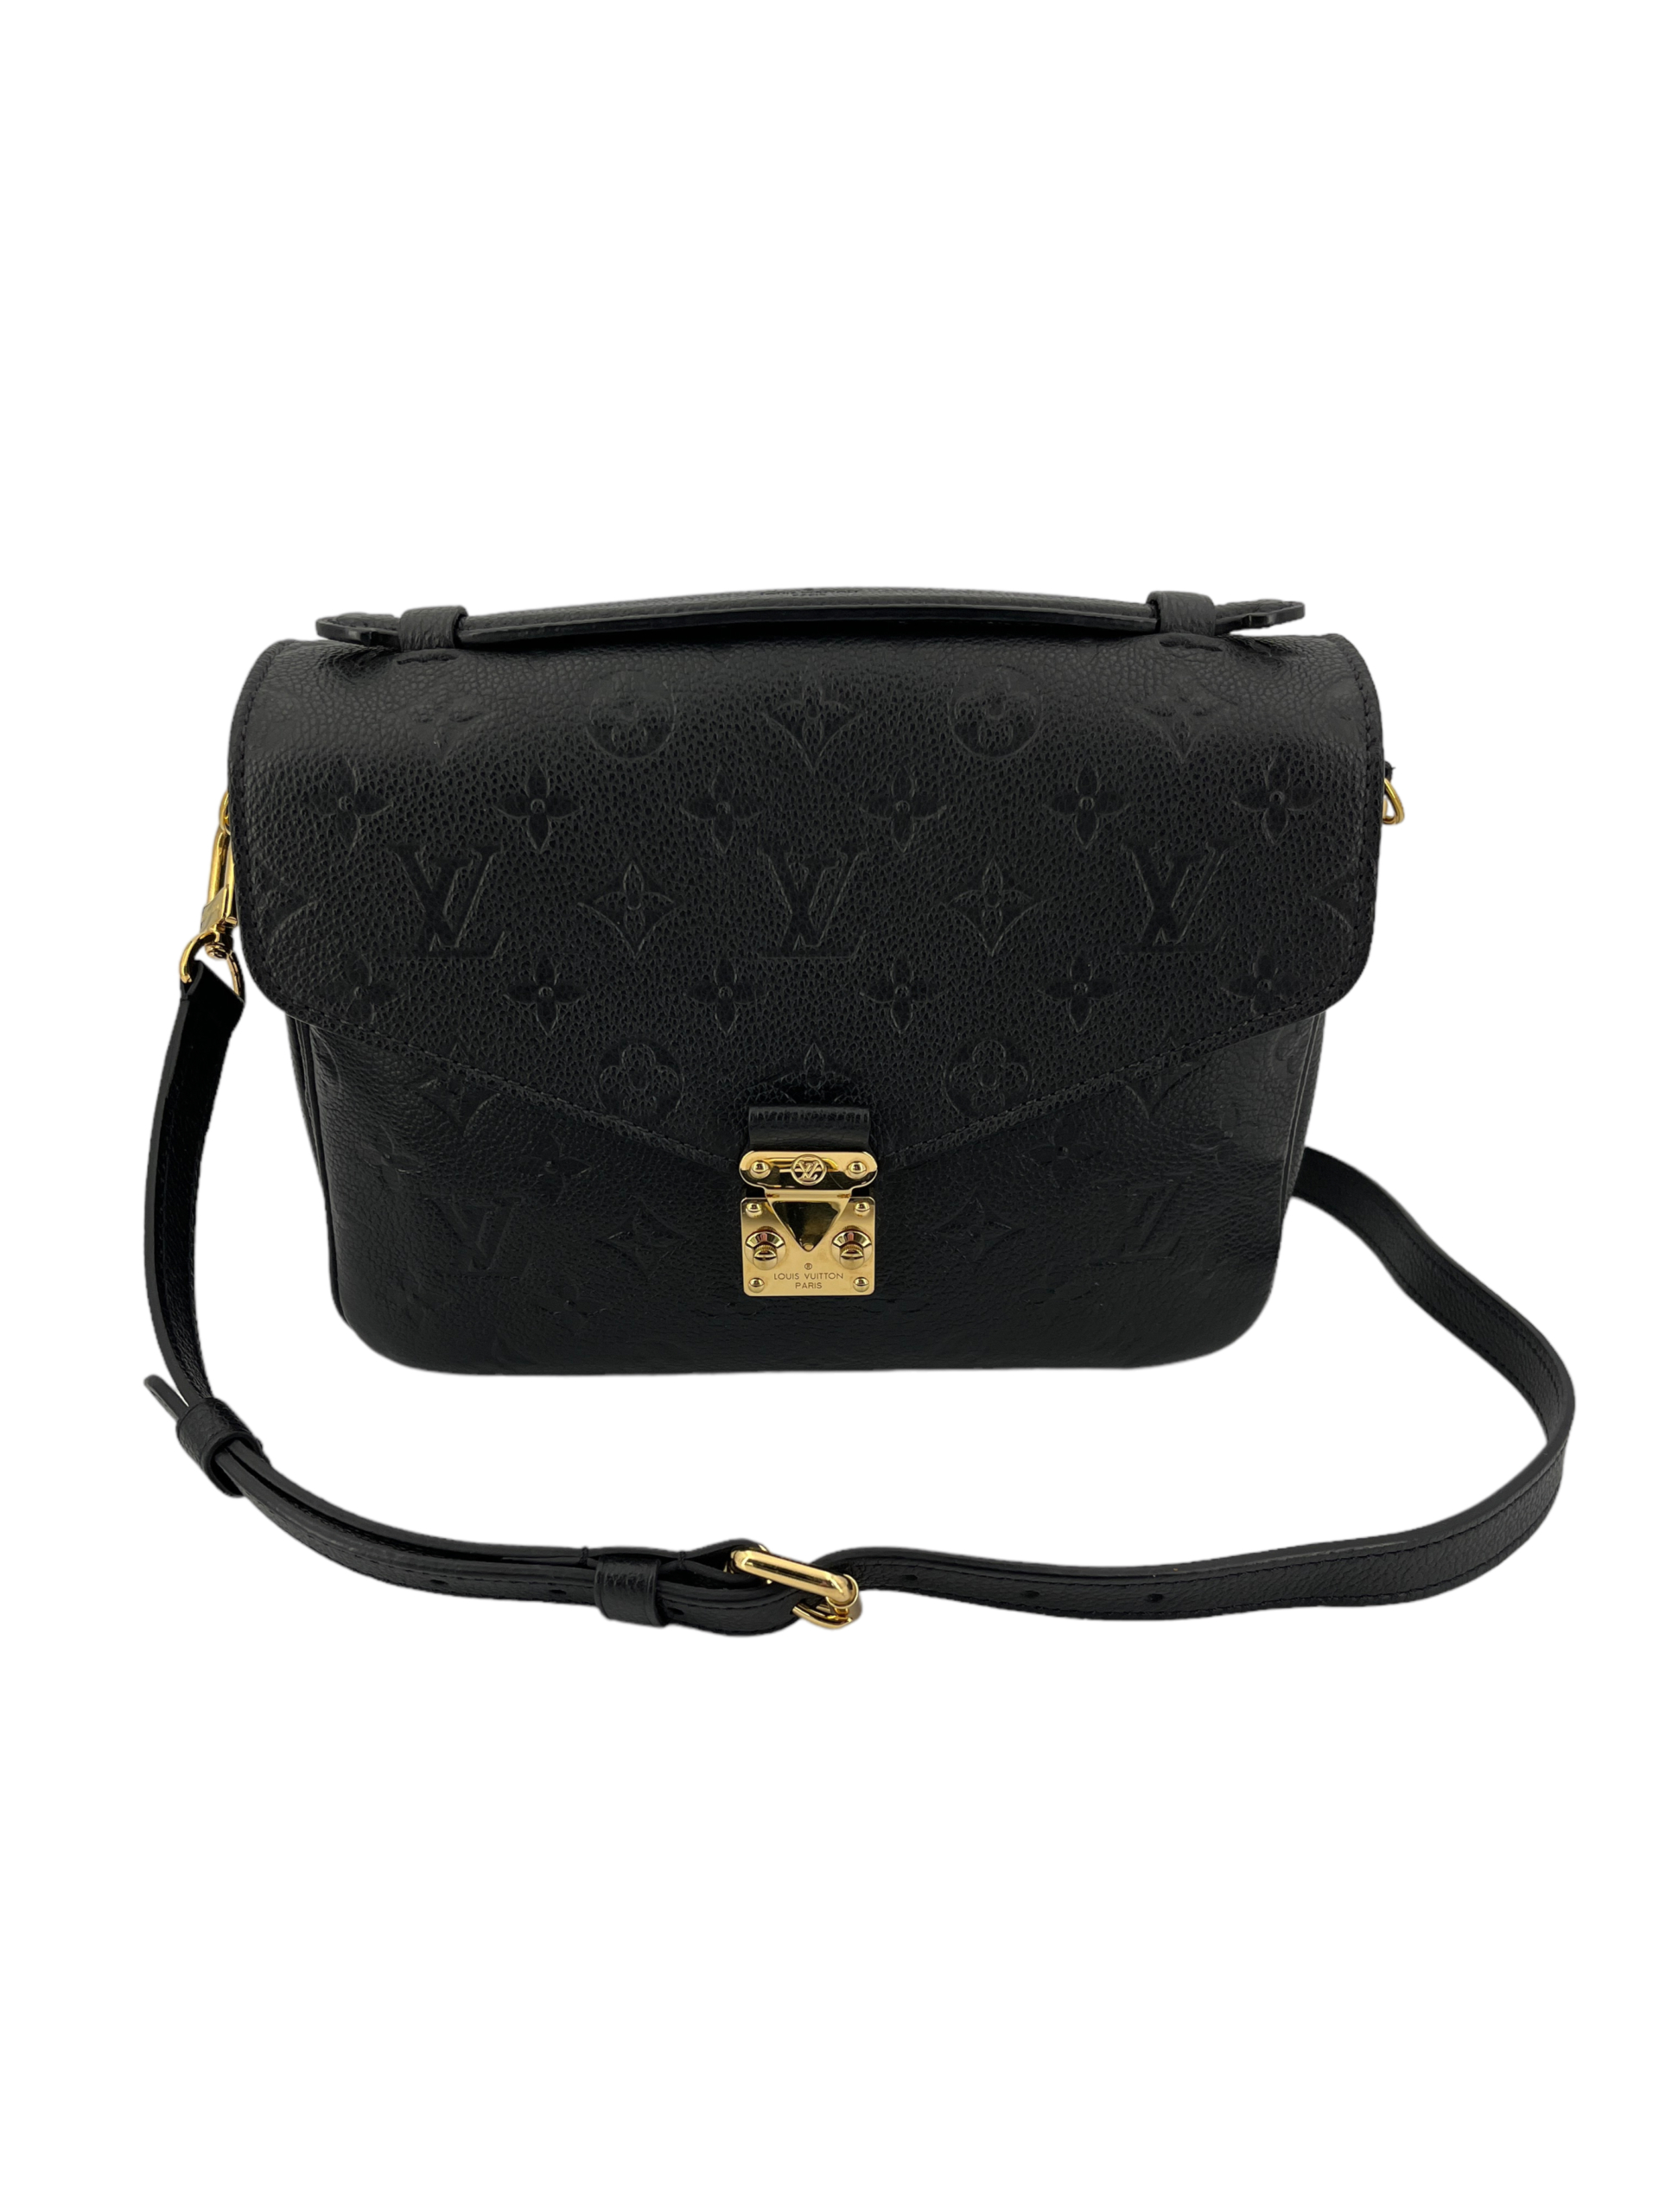 Serial number M41487 POCHETTE METIS  Pochette metis, Leather, Cowhide  leather